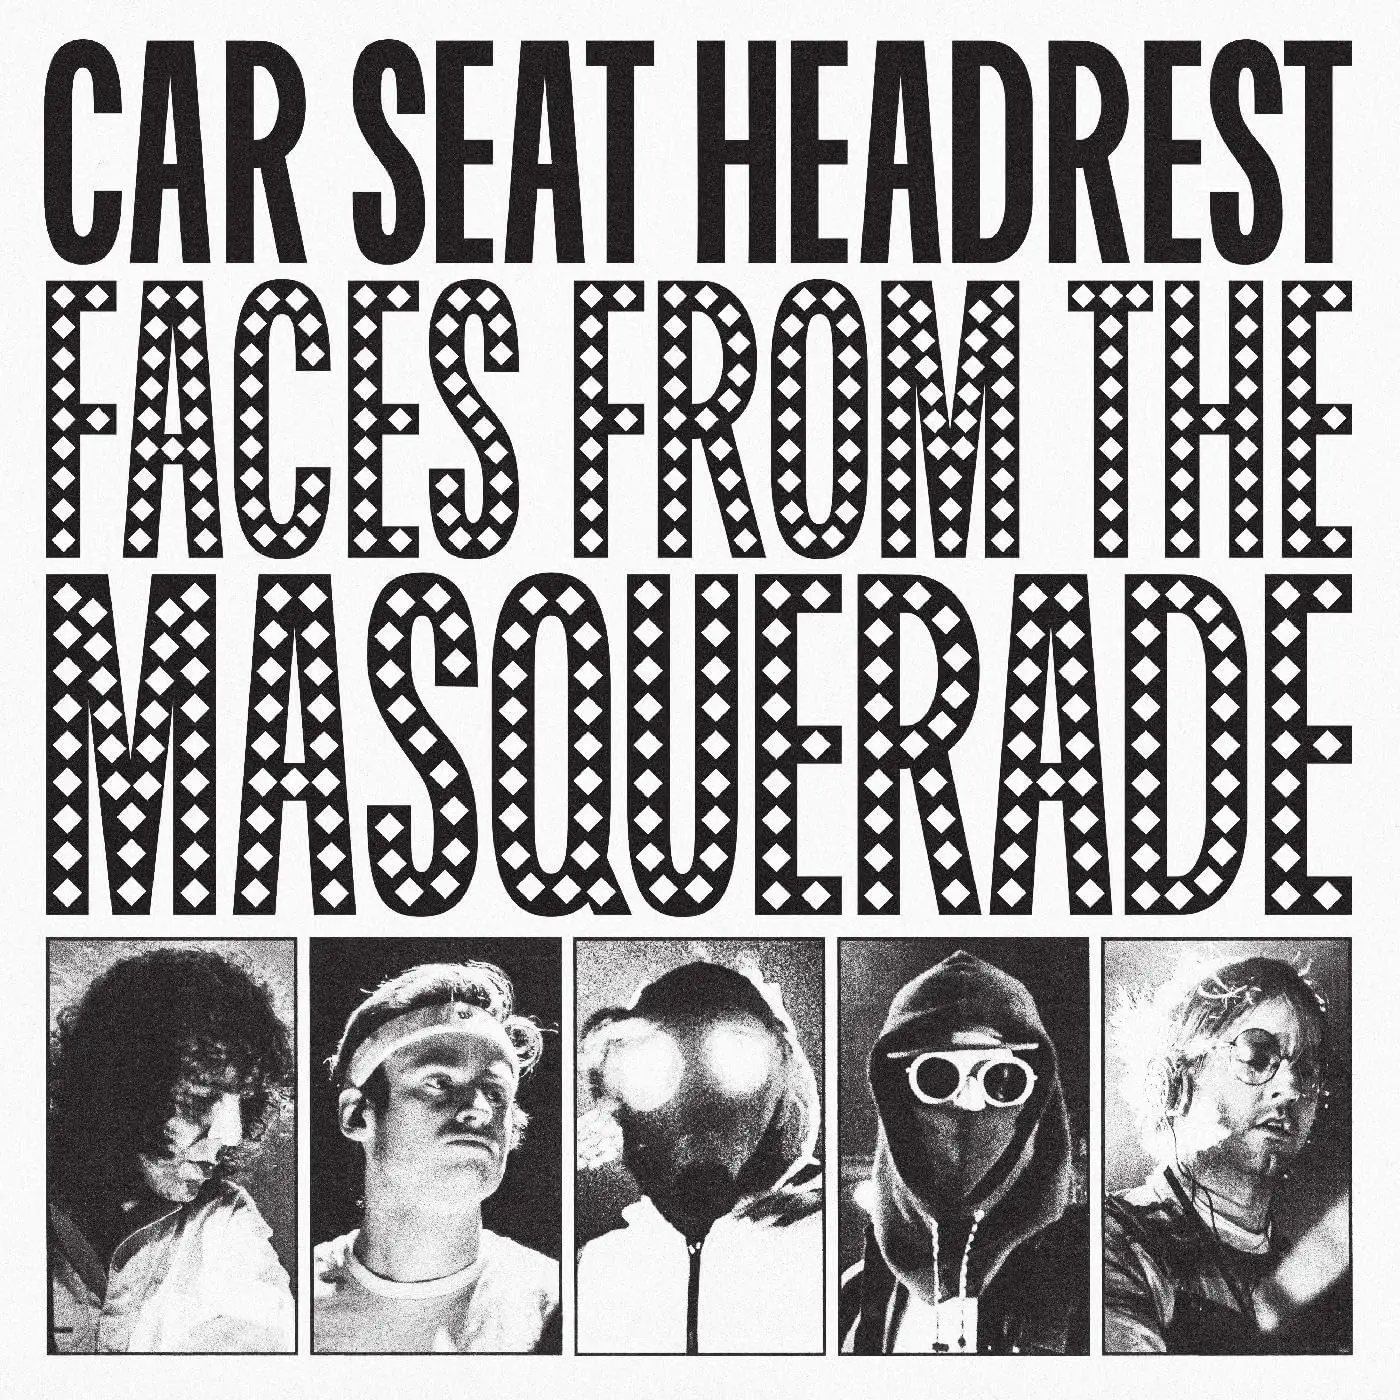 <strong>Car Seat Headrest - Faces From The Masquerade</strong> (Vinyl LP - black)